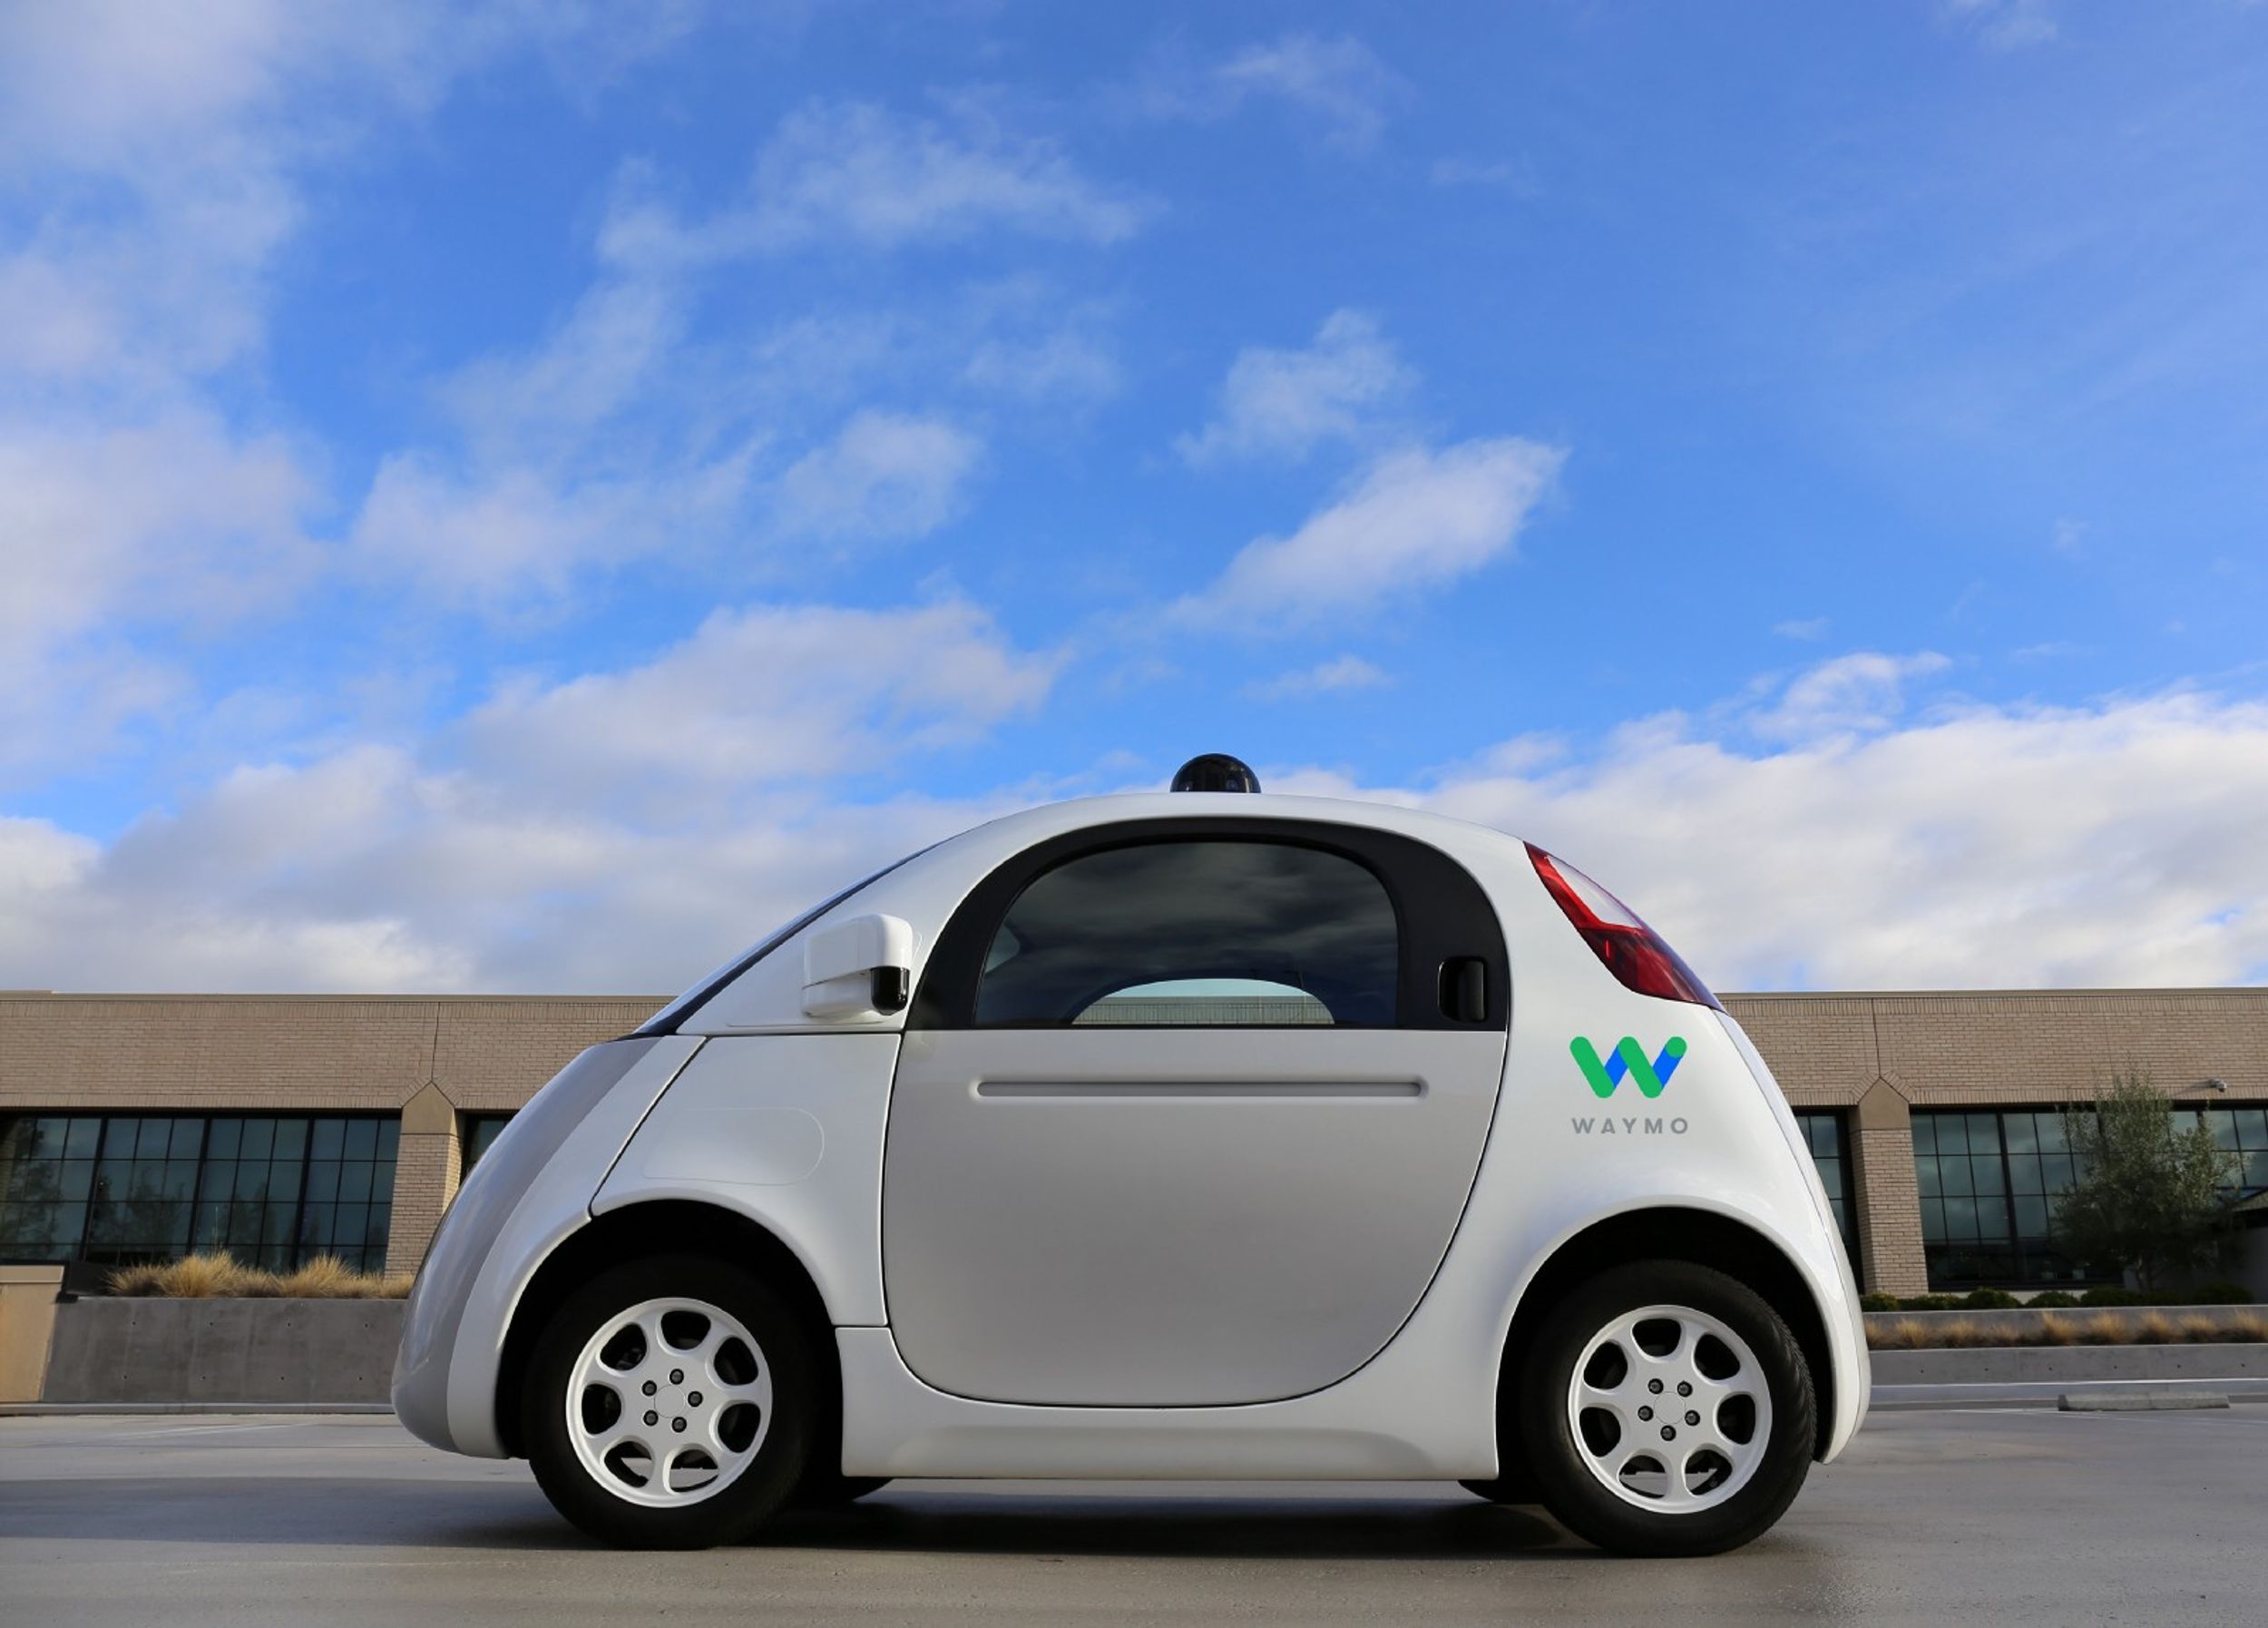 Court documents accidentally reveal costs for the company's self-driving car project between 2009 and 2015